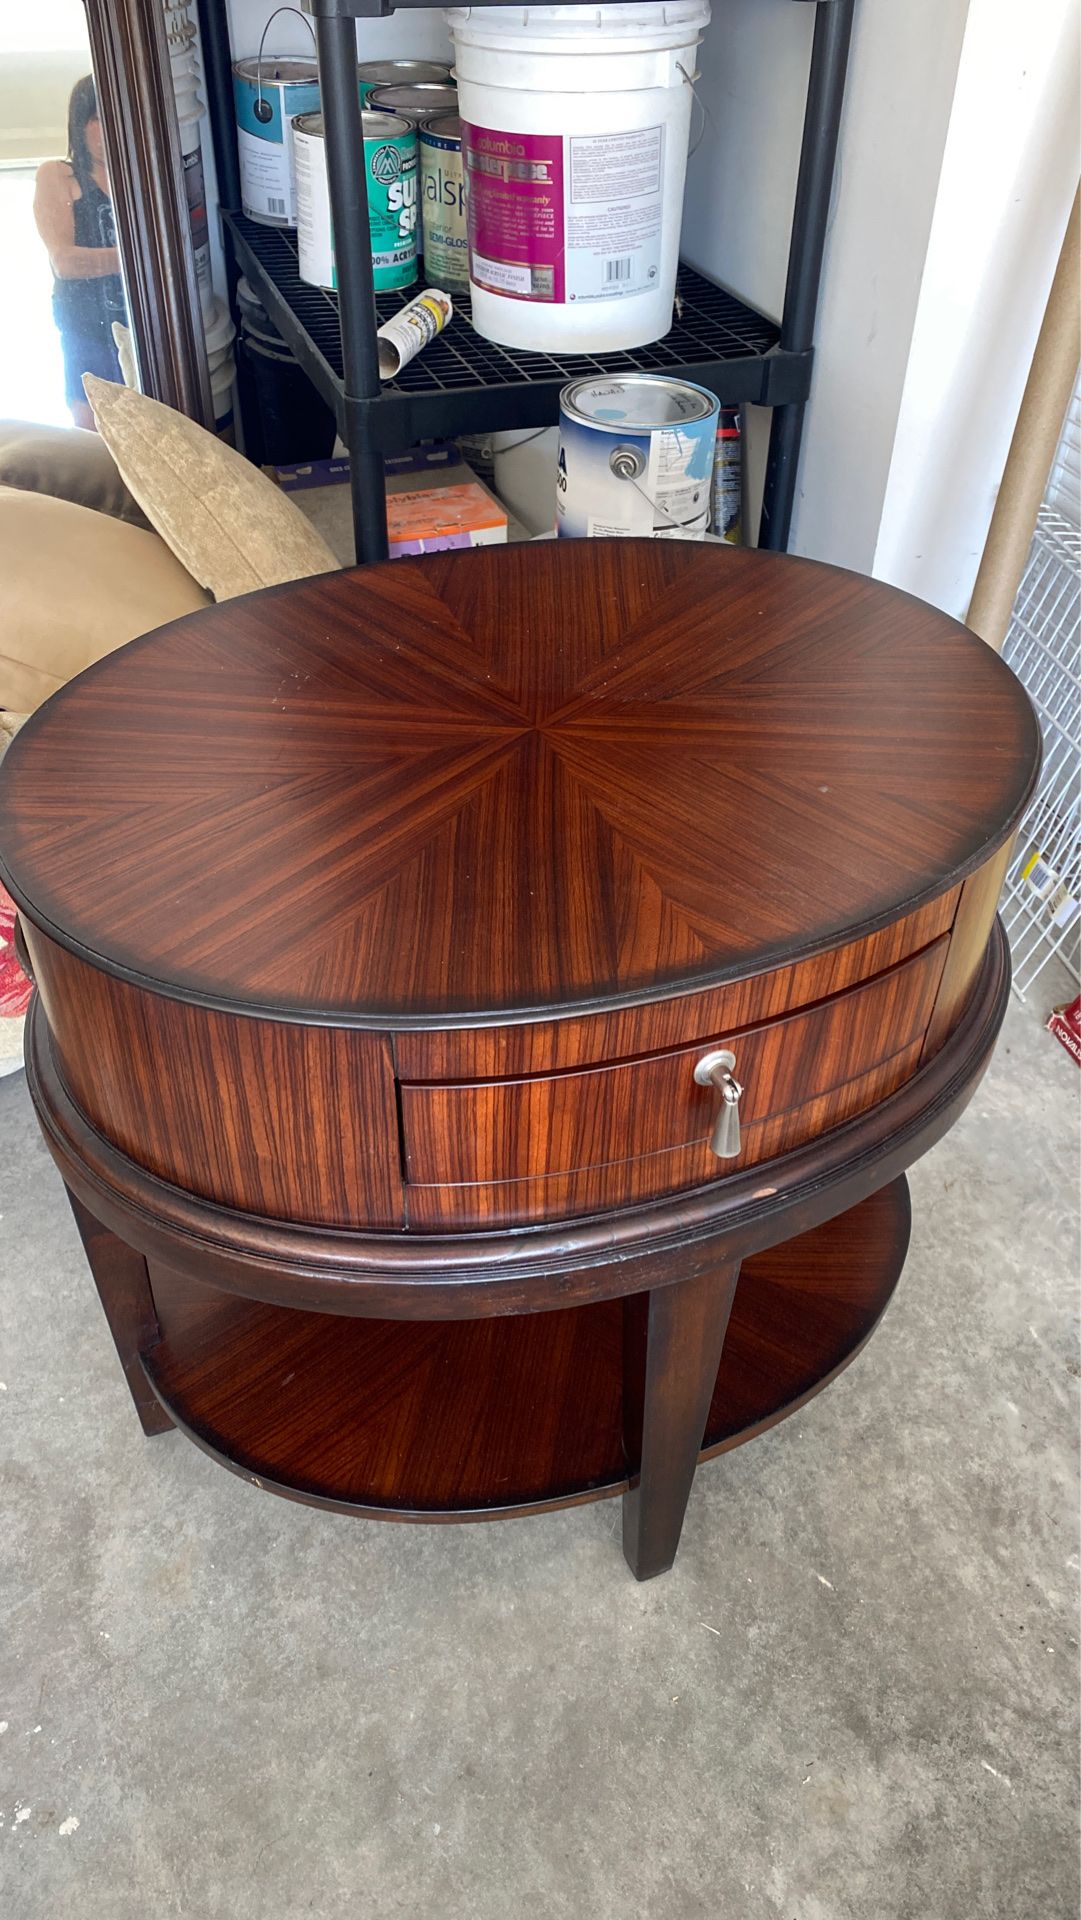 Oval side table with drawer and bottom shelf.